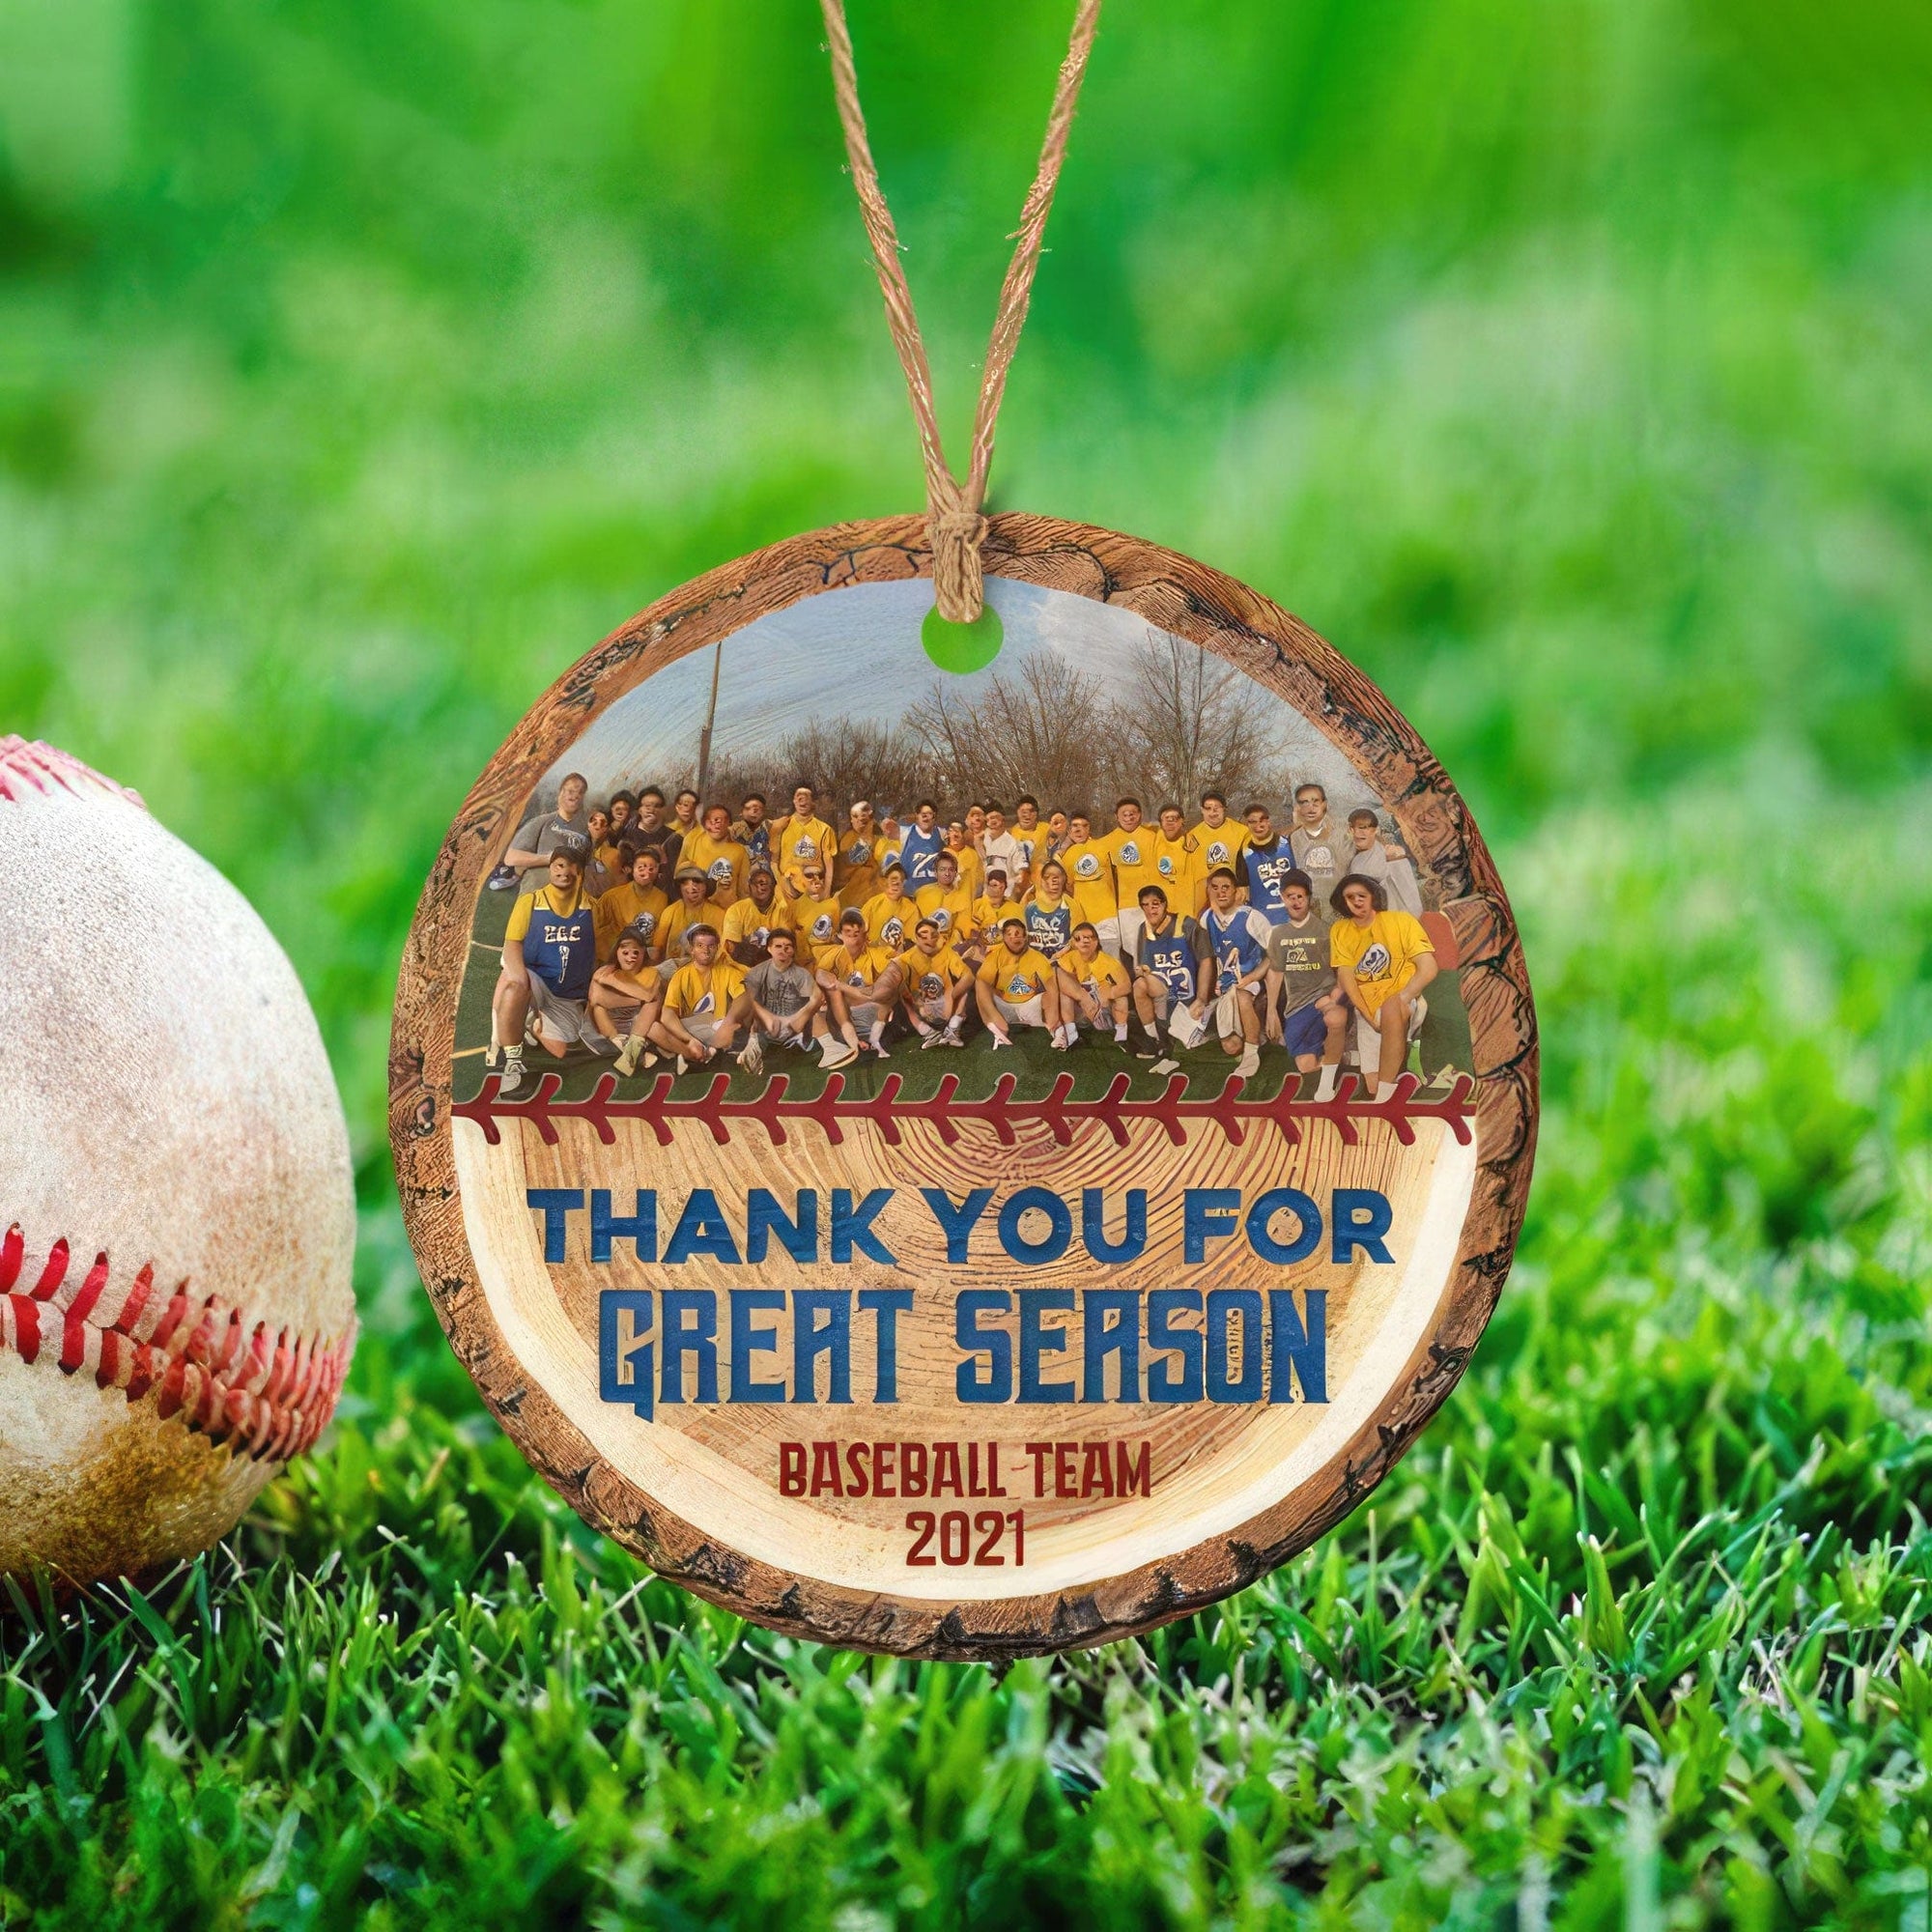 GeckoCustom Upload Photo Baseball Ornament, Thank You For Great Season HN590 Pack 1 / 2.75" tall - 0.125" thick / White Color